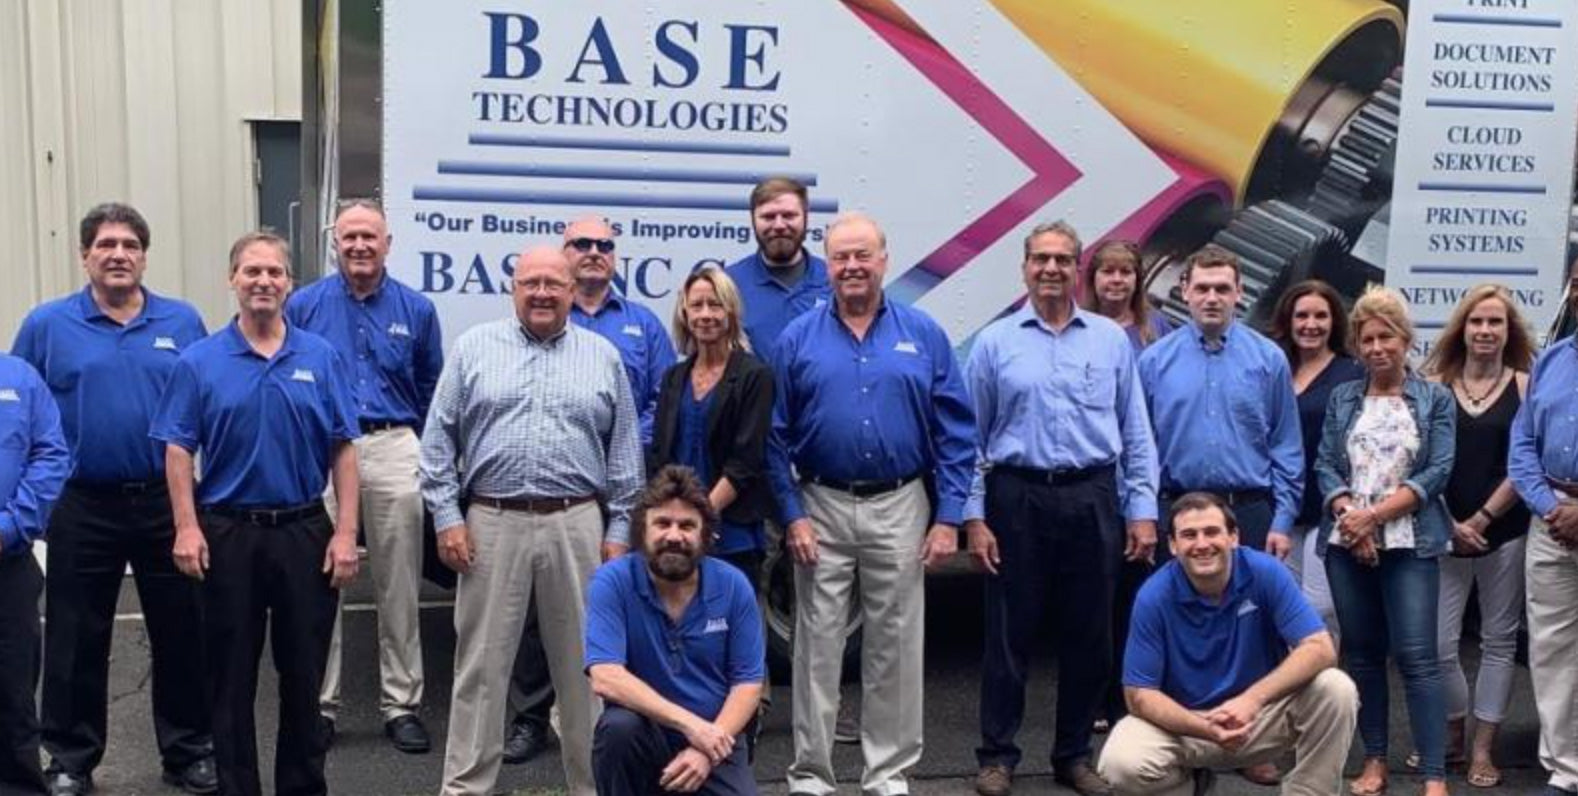 A group picture of the BASE Technologies team.  